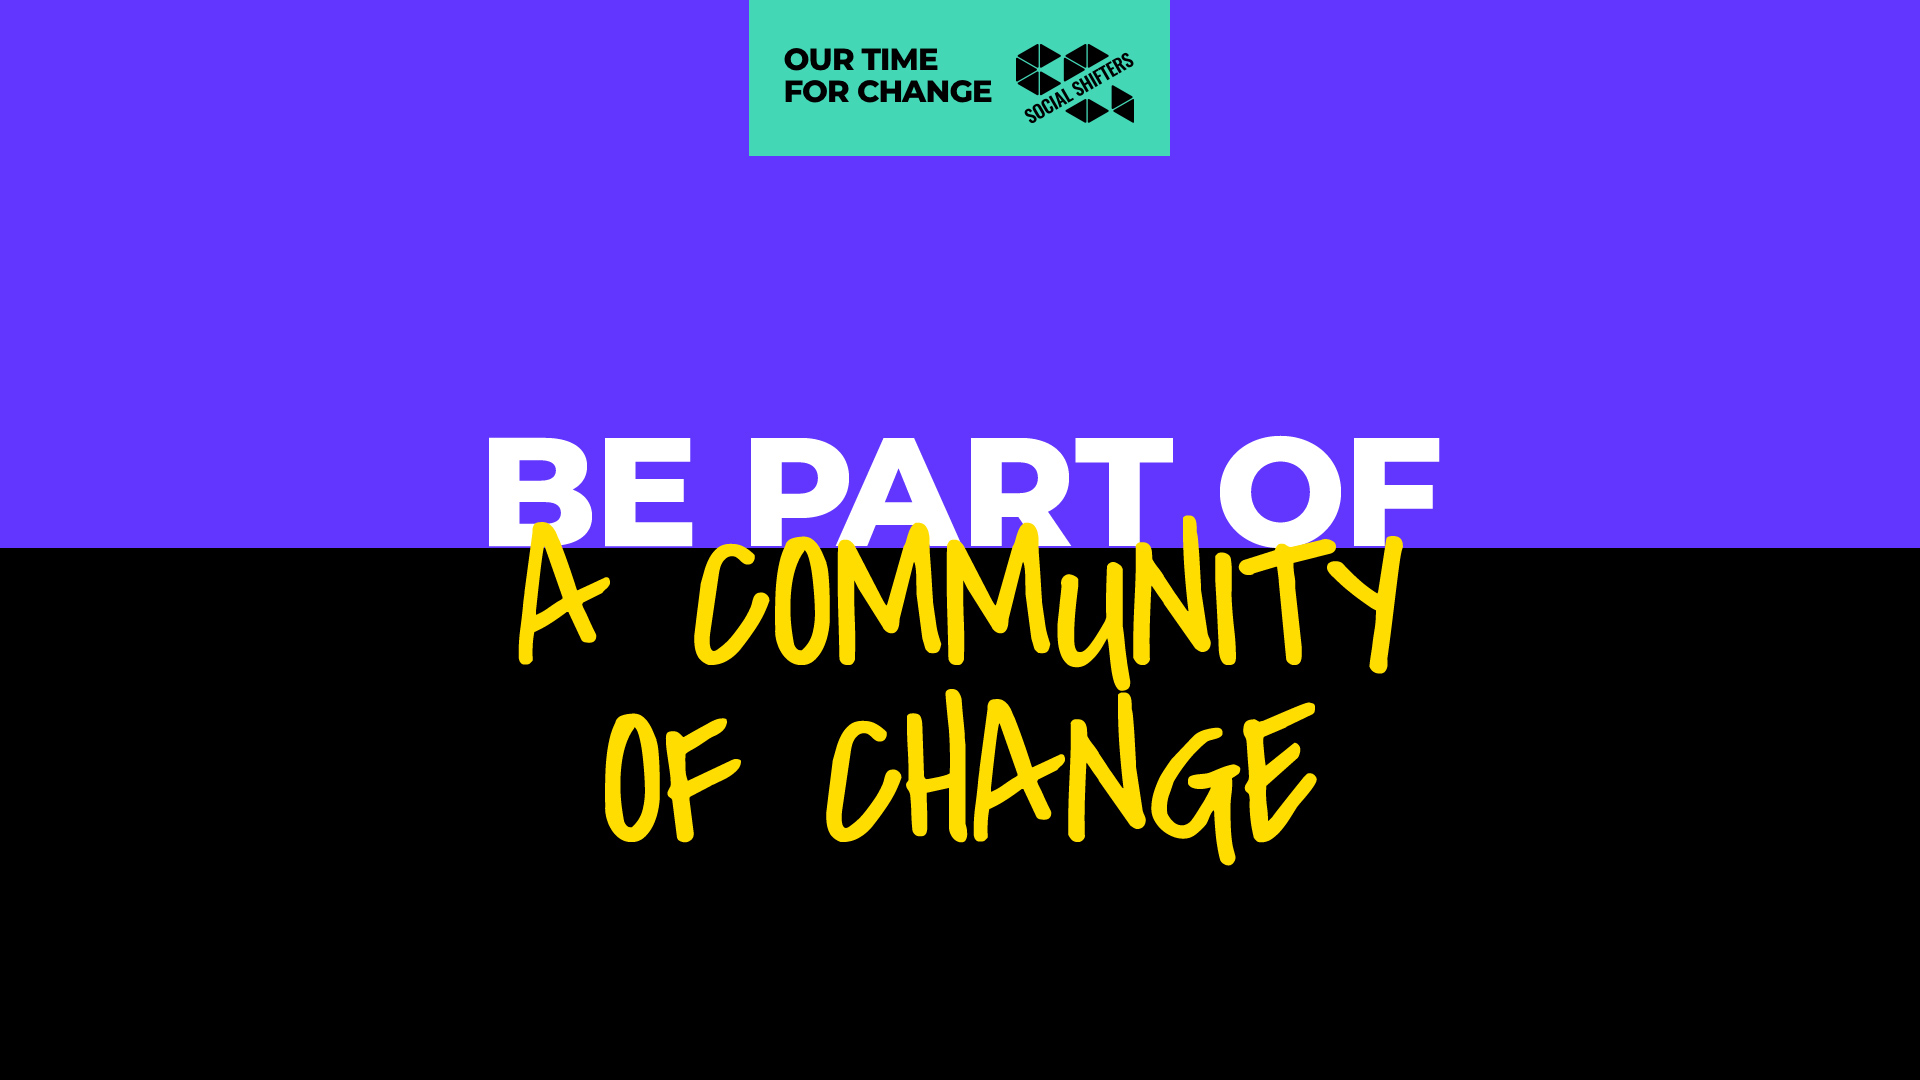 Be part of a community of change in yellow text on a horizontally split purple and black background. 